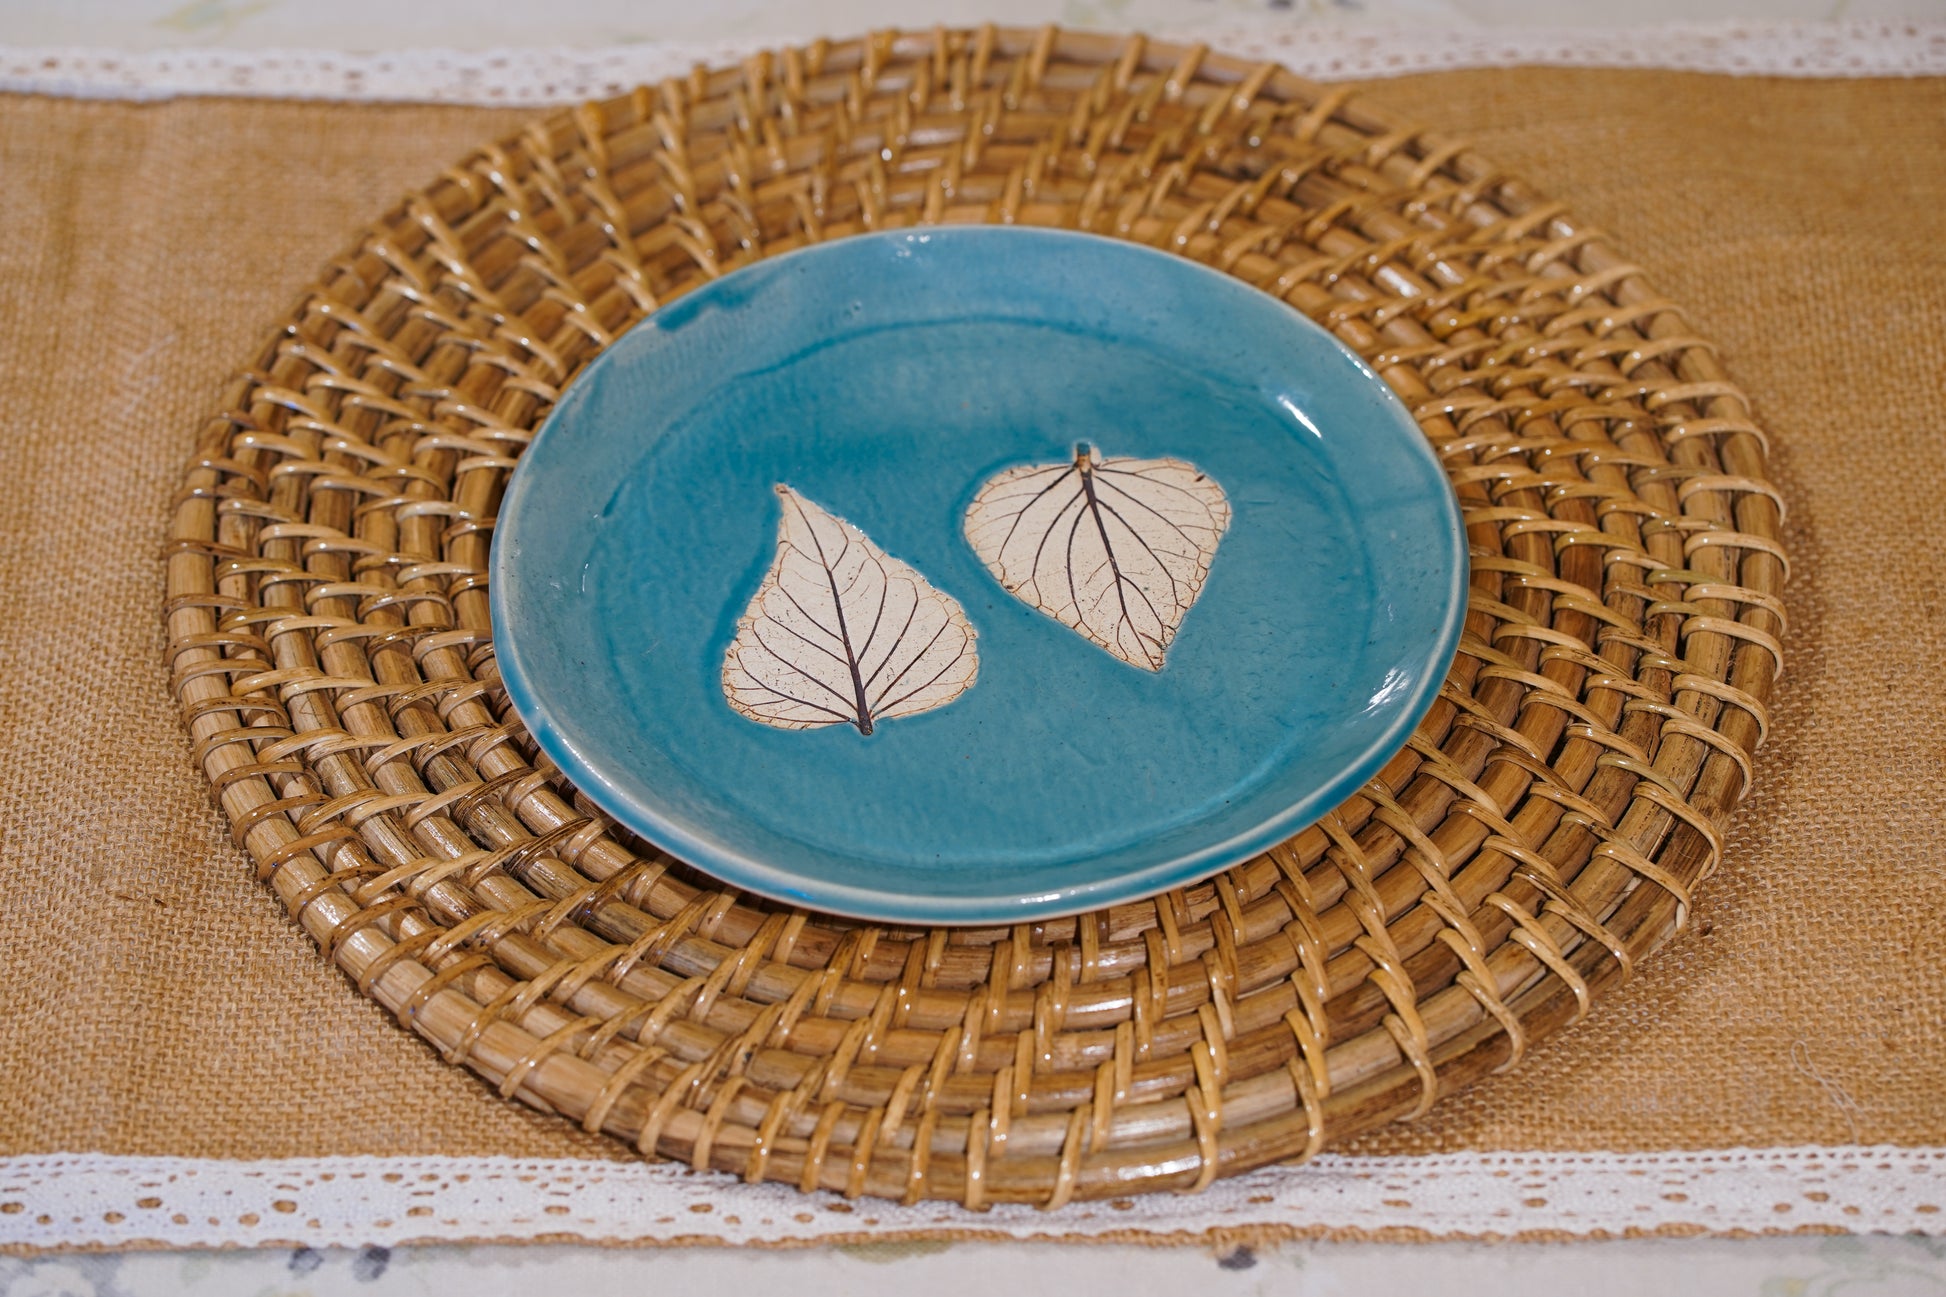  Artisanal tableware, Cane woven round placemats, Charm for dining experience, Dining table décor, Eco-friendly dining accessories, Handcrafted cane placemats, Hand-made dining placemats, Natural cane placemats, Round woven placemats, Sustainable cane products, tesu